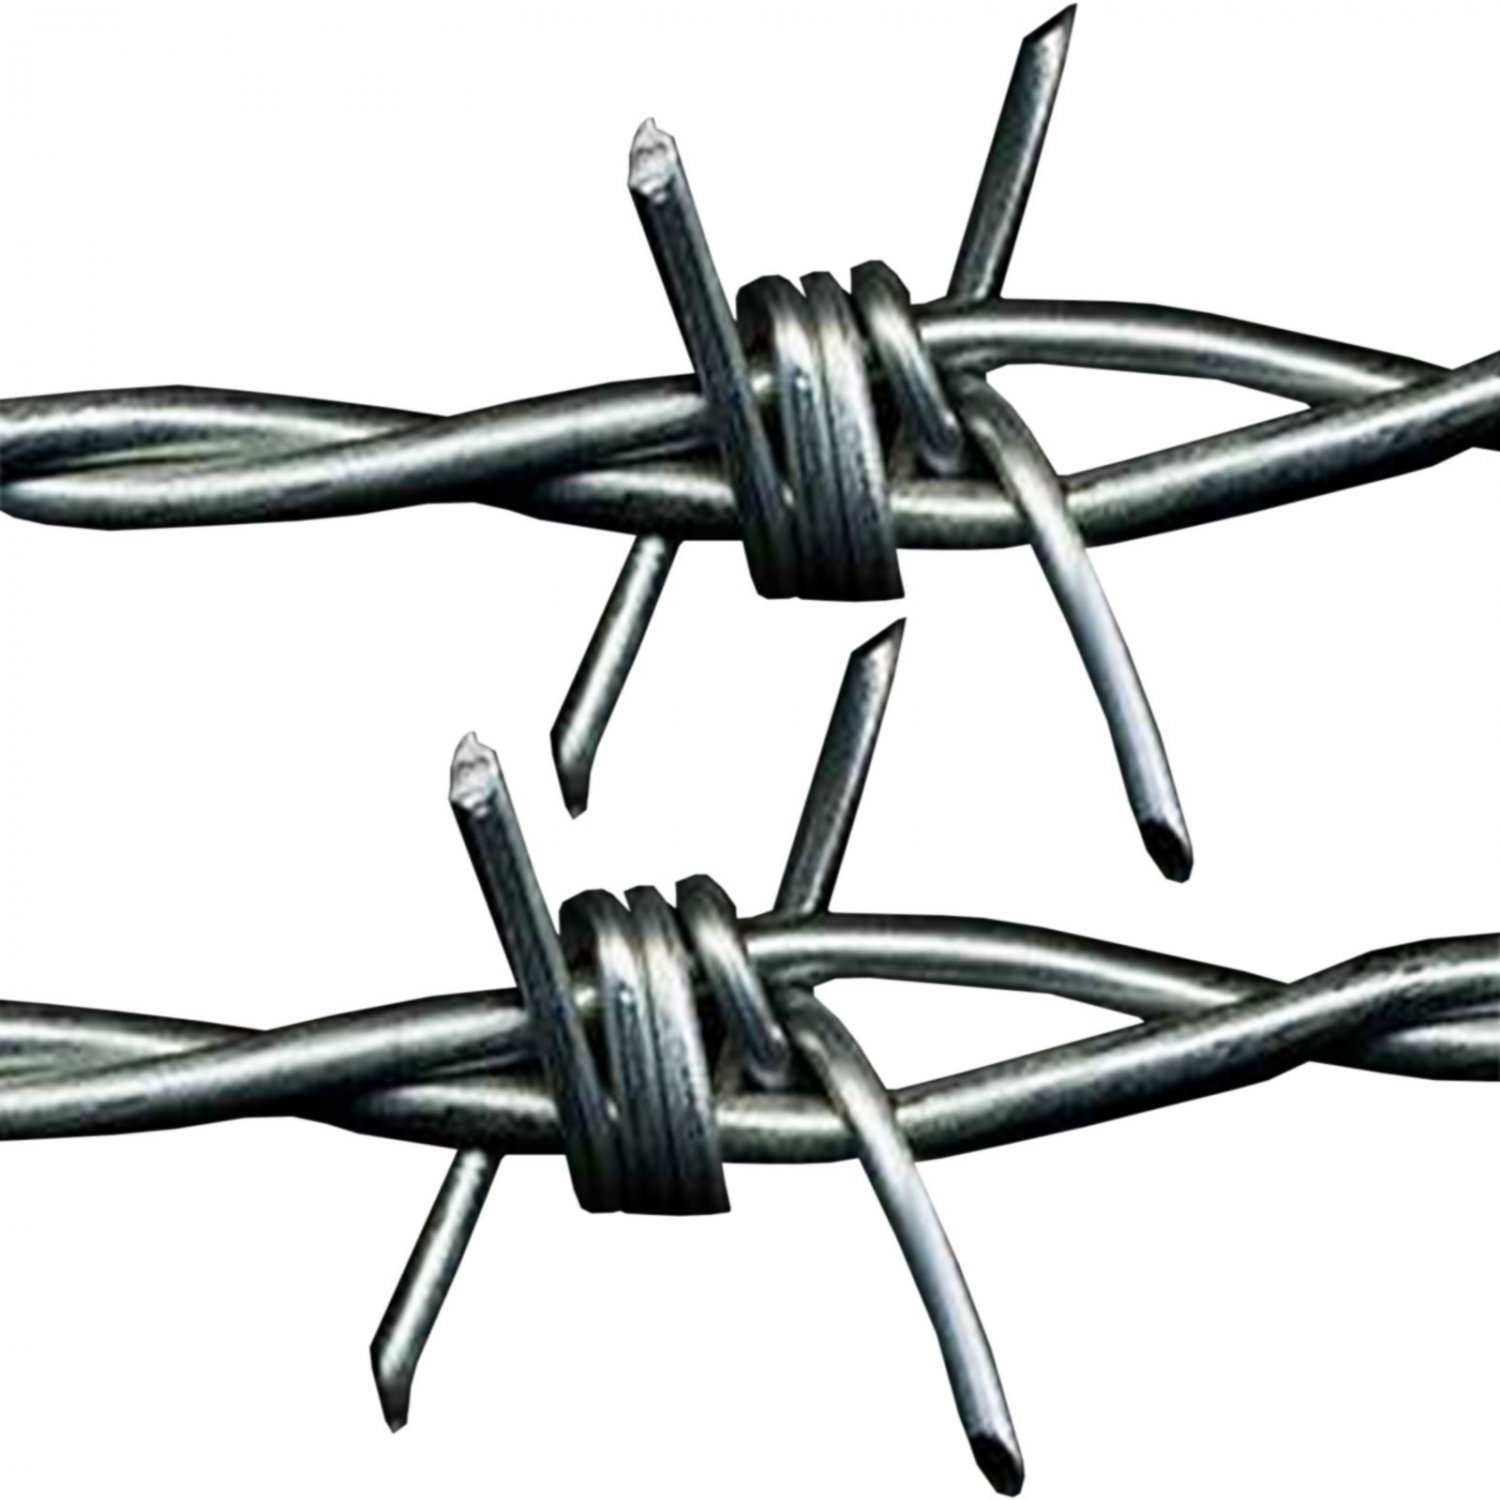 30m x 1.7mm Galvanised Steel Barbed Wire Livestock Security - £10.99 ...